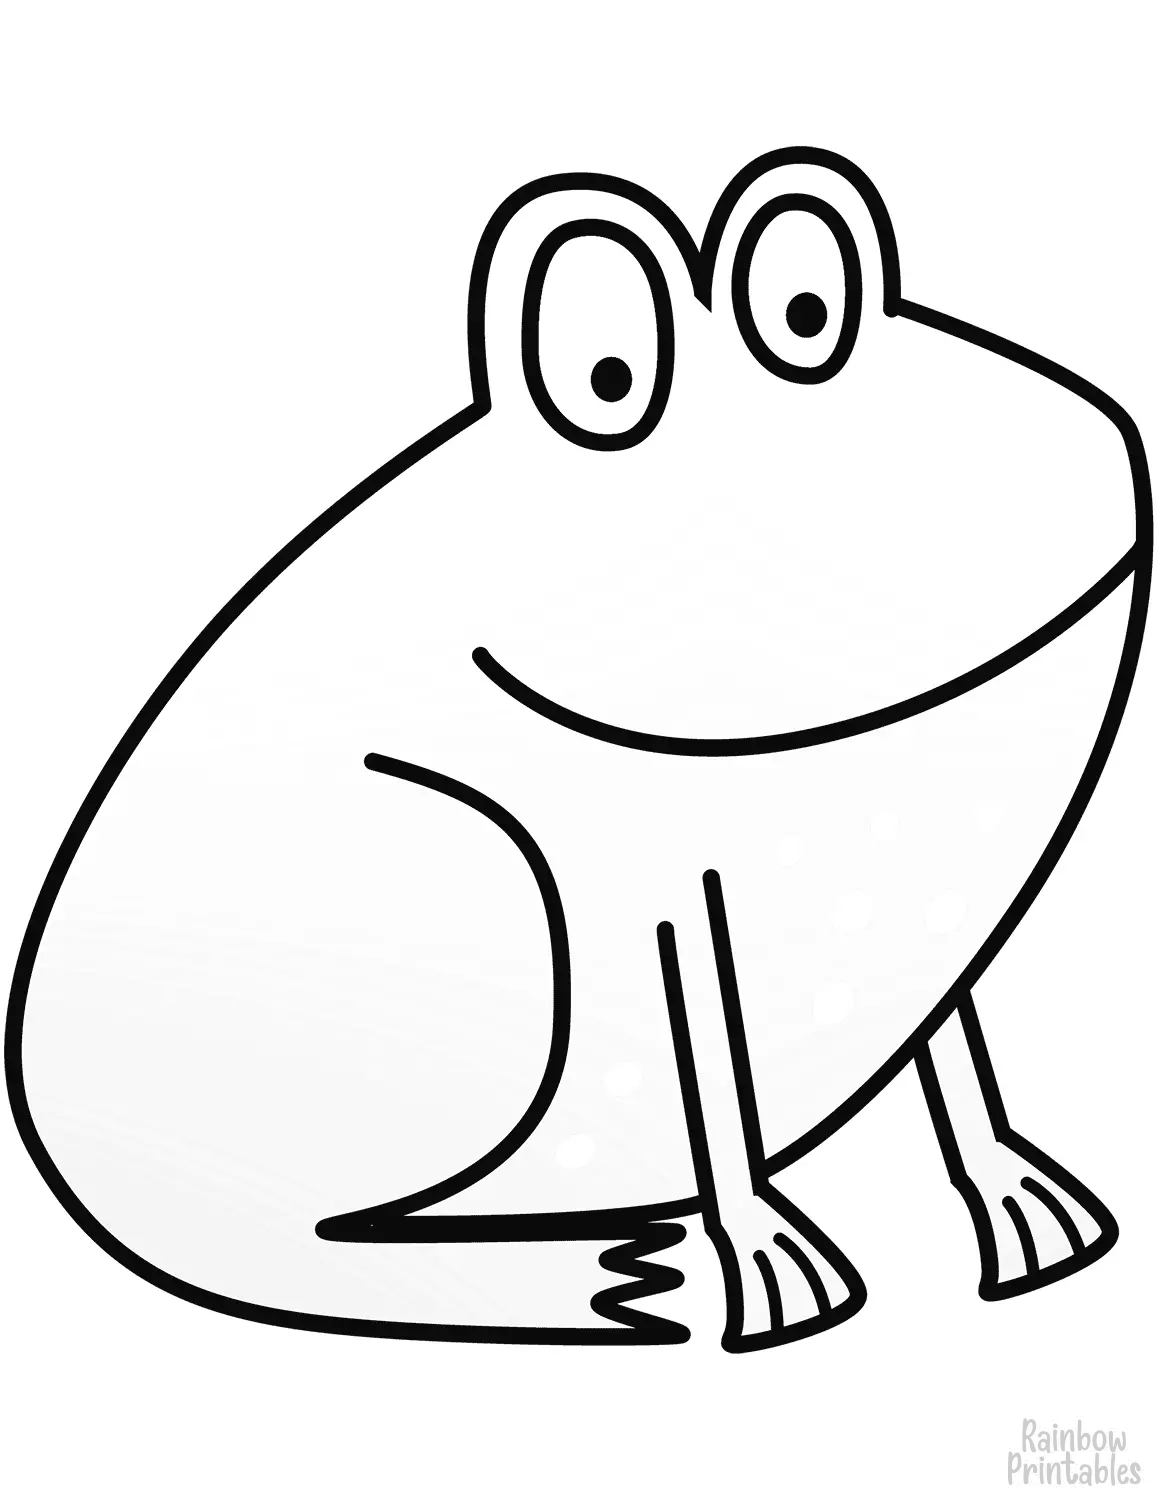 SIMPLE-EASY-line-drawings-CARTOON-FROG-coloring-page-for-kids3